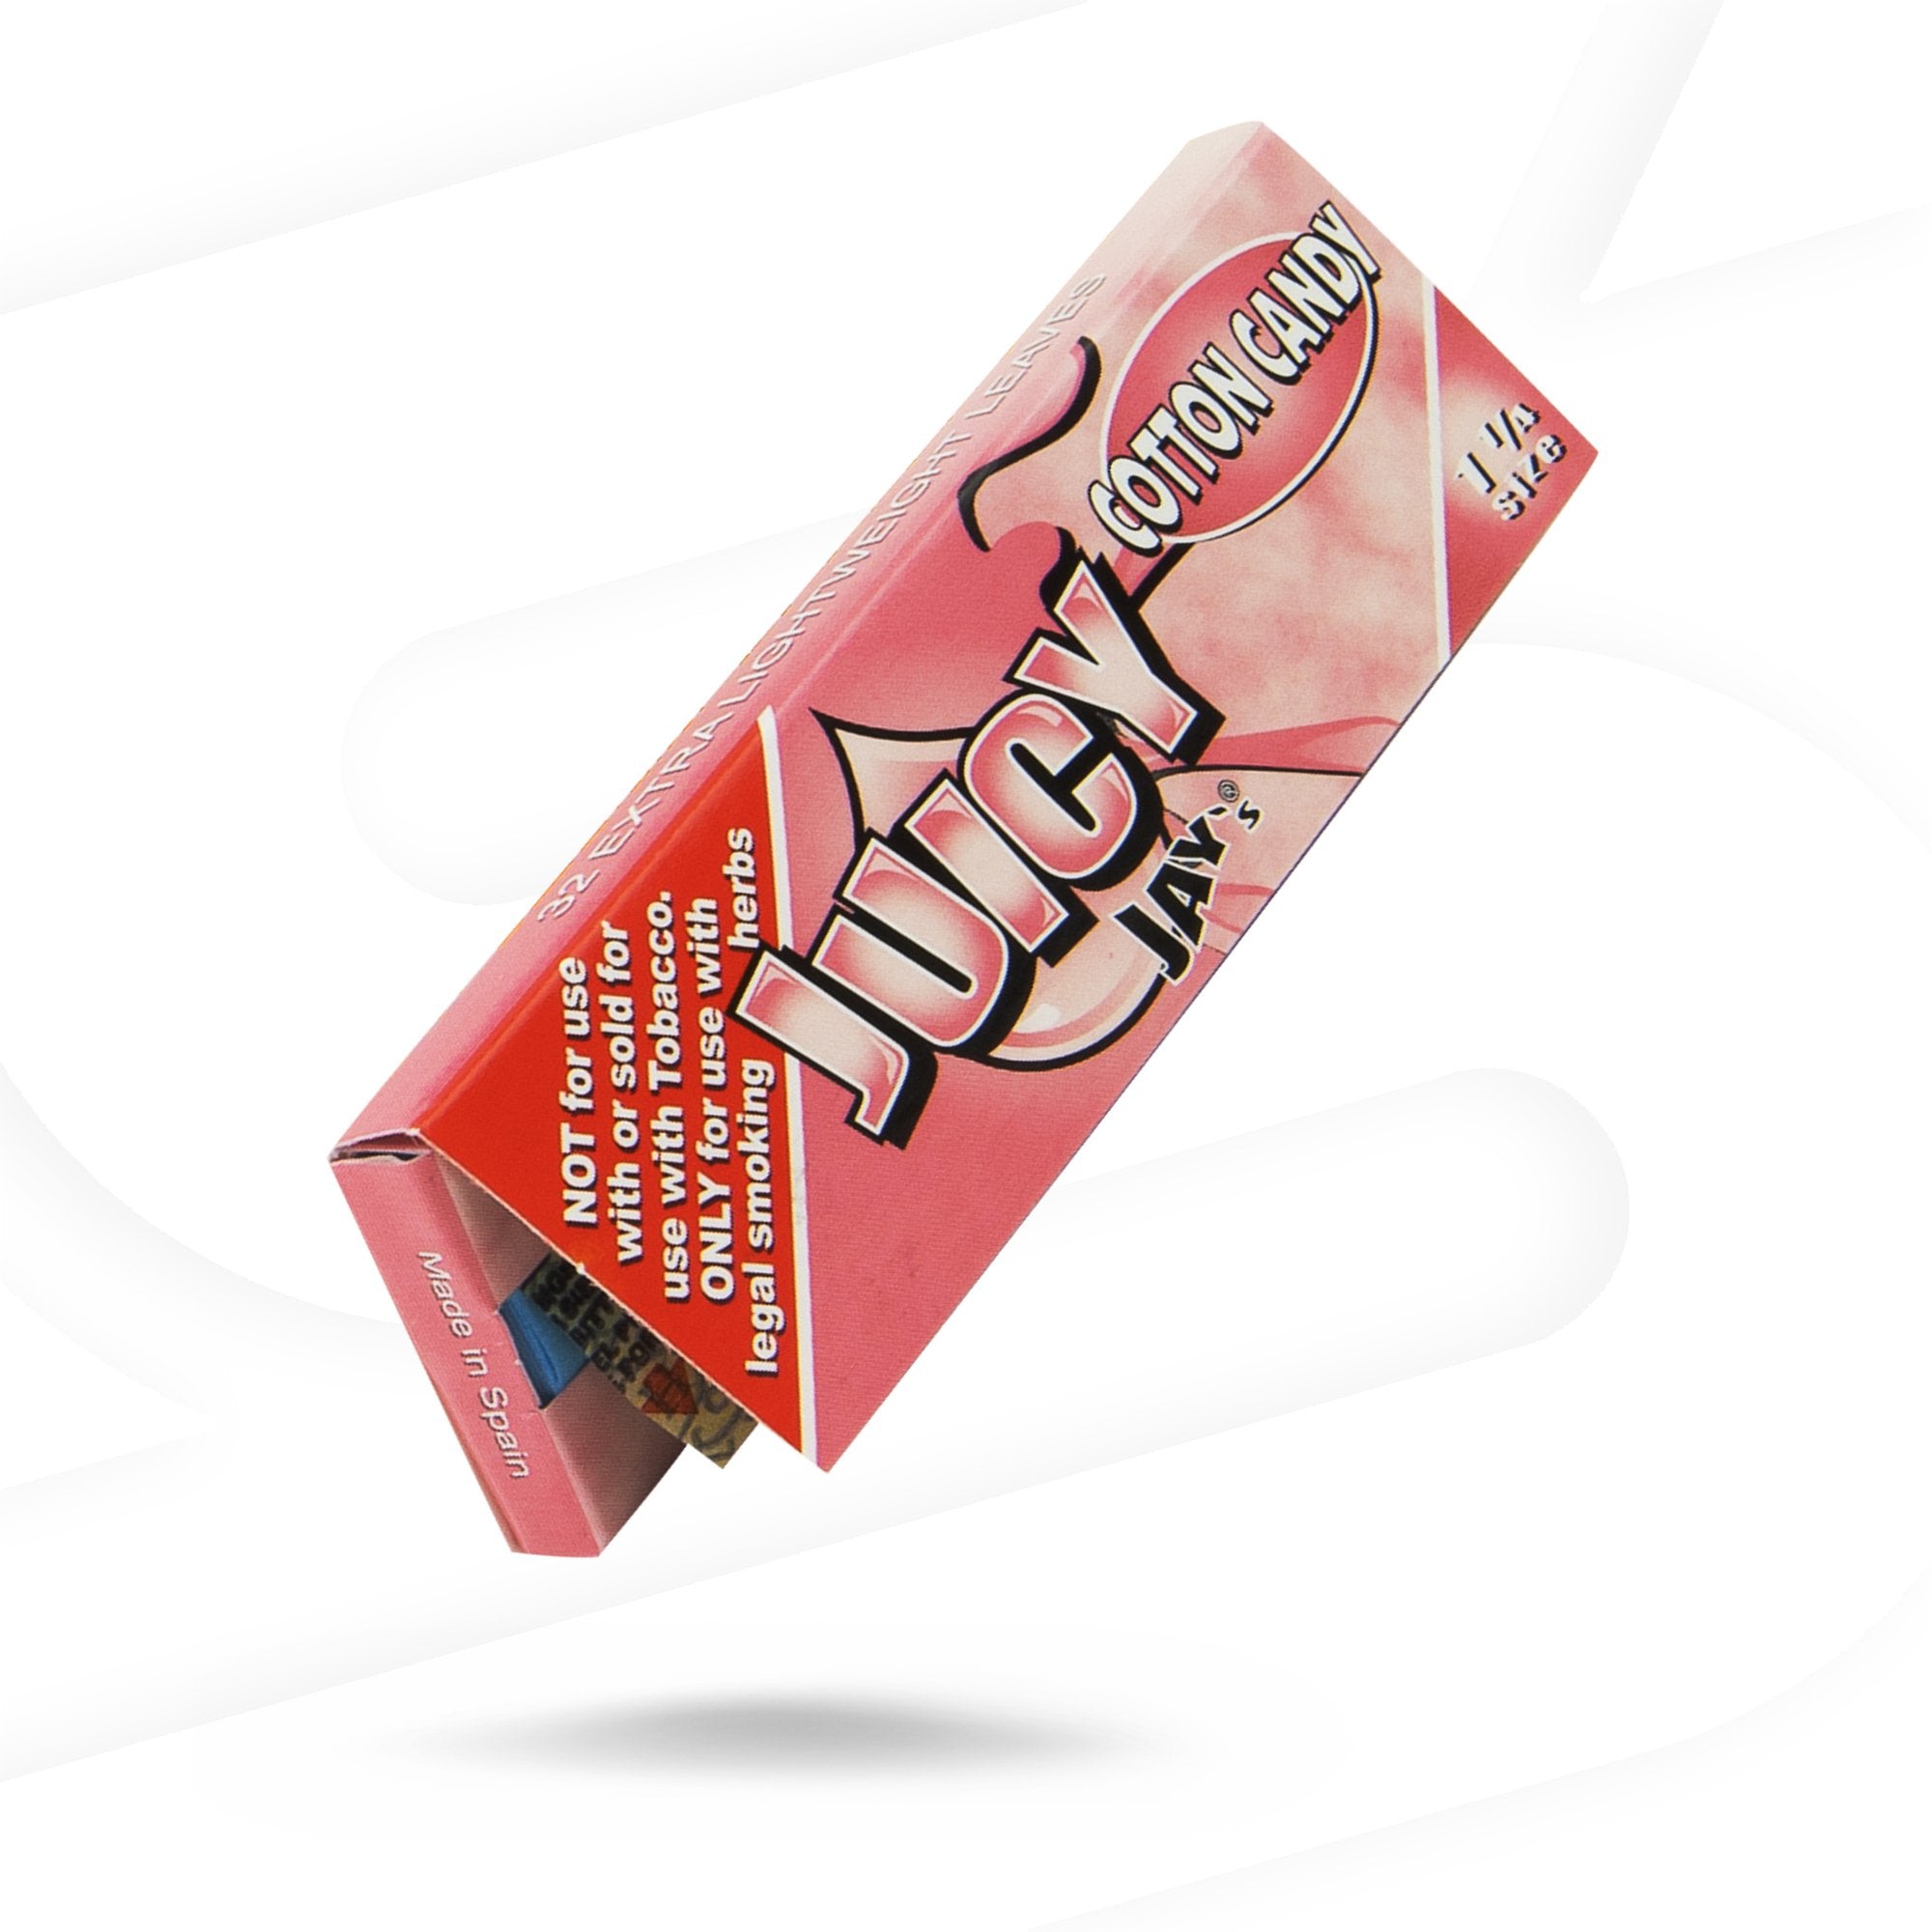 Juicy Jays 1 1/4 Cotton Candy Flavored Hemp Rolling Papers Rolling Papers esd-official